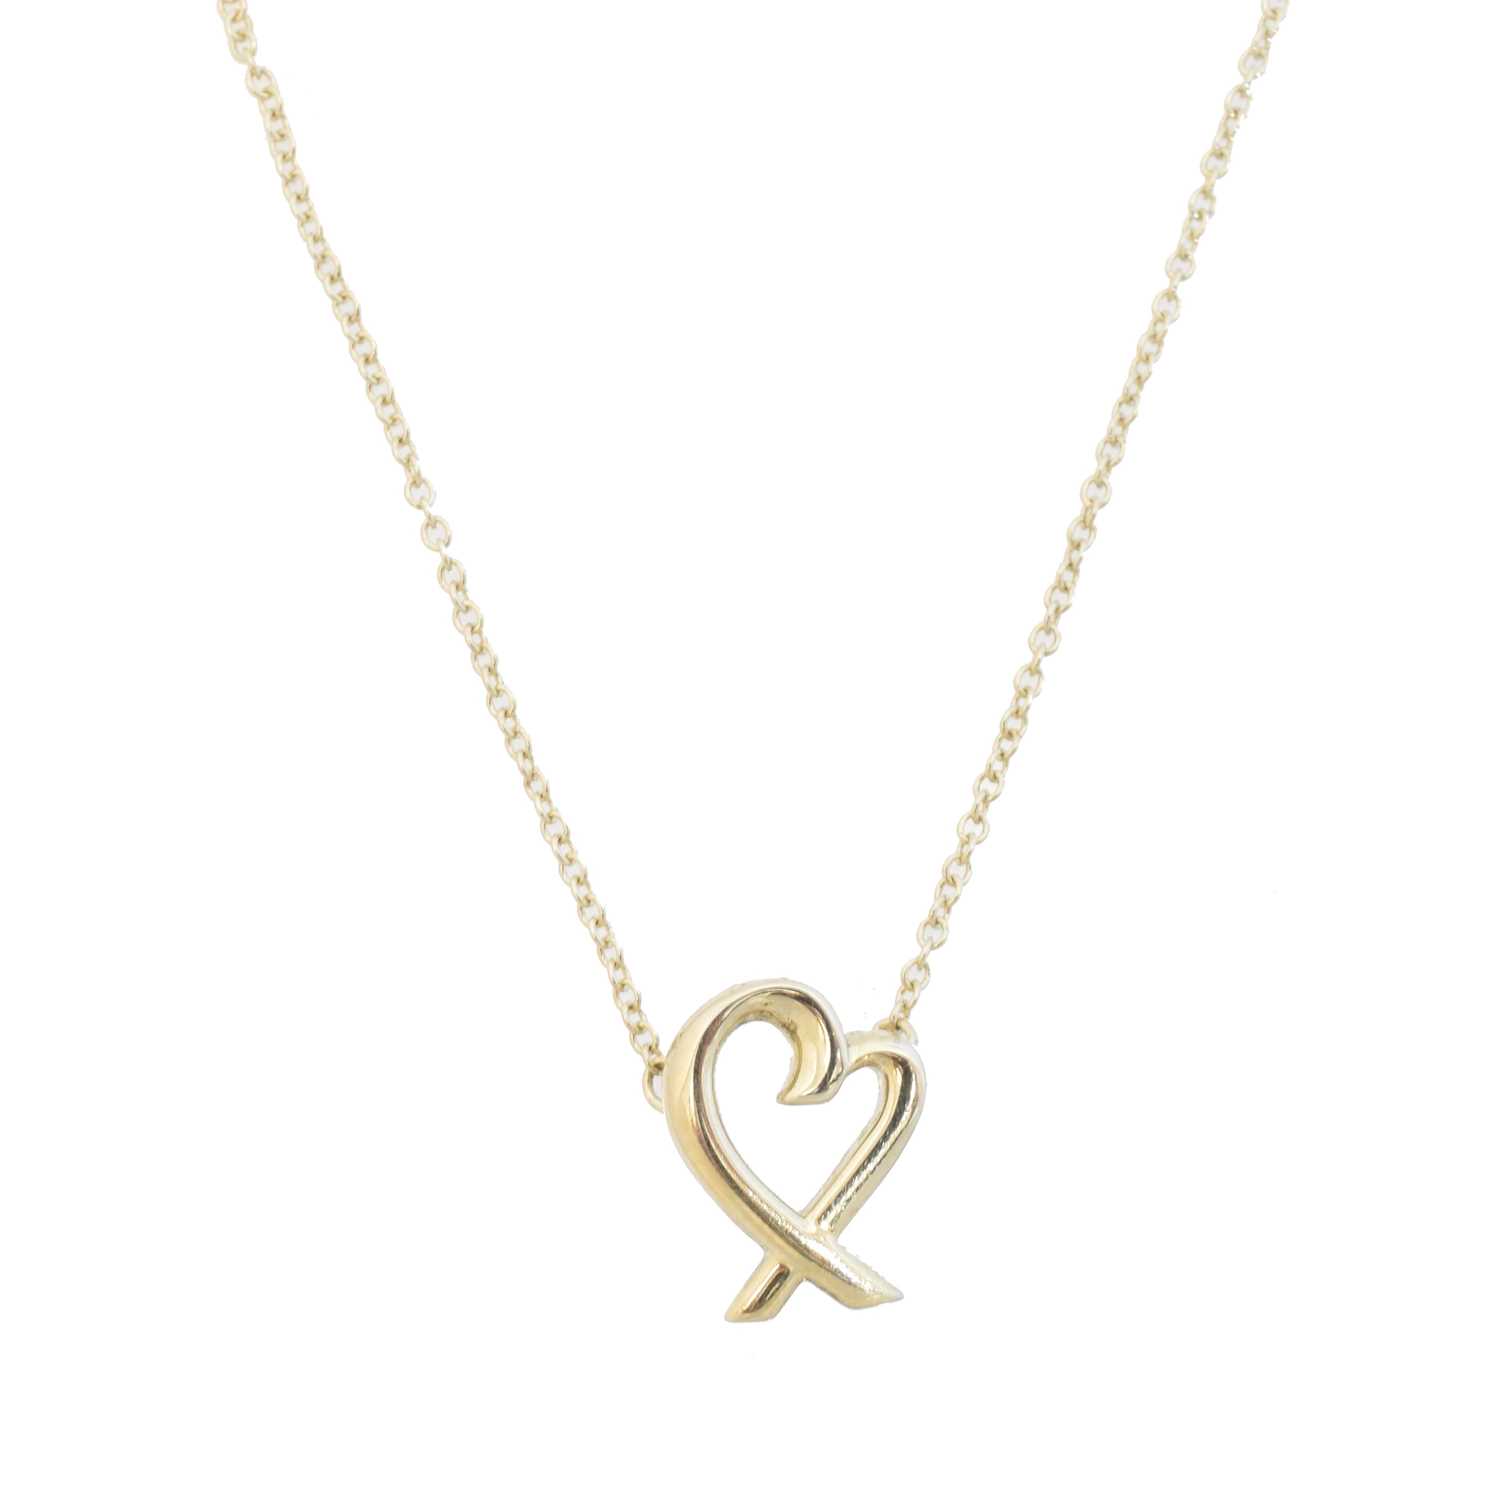 Lot 53 - A 'Loving Heart' necklace by Paloma Picasso for Tiffany & Co.